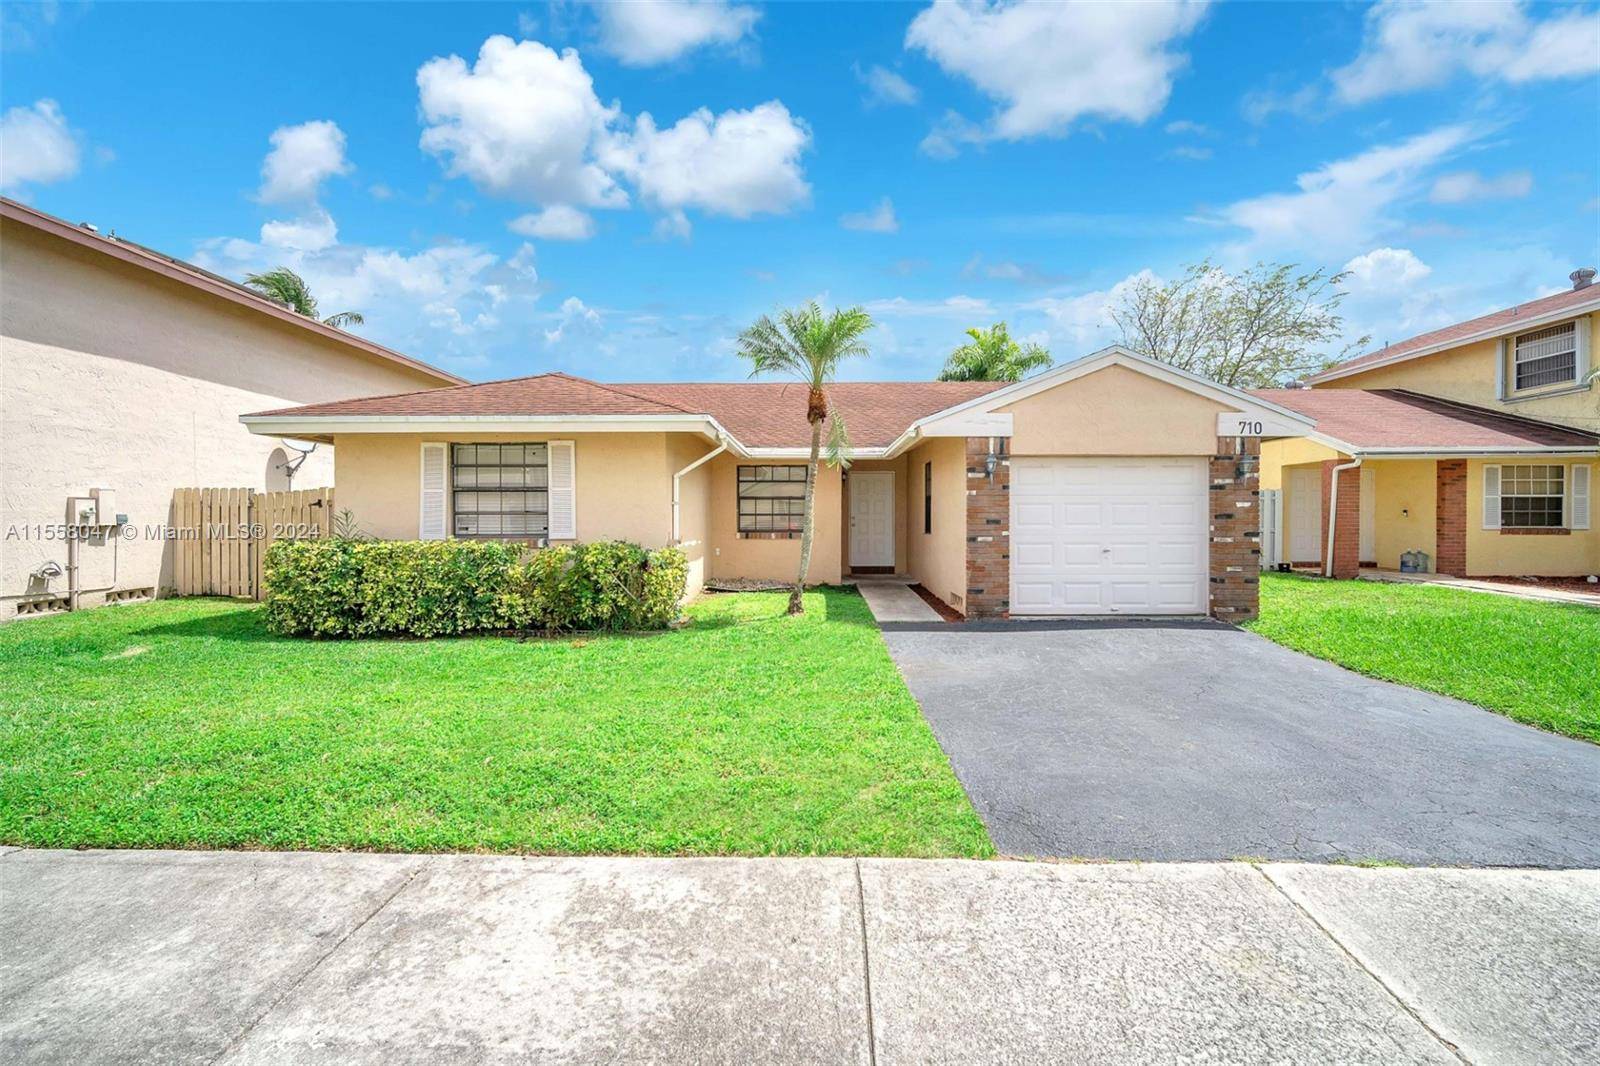 MOVE IN READY ! Amazing bright 3 bed 2bath SFH, in sought after Shenandoah.